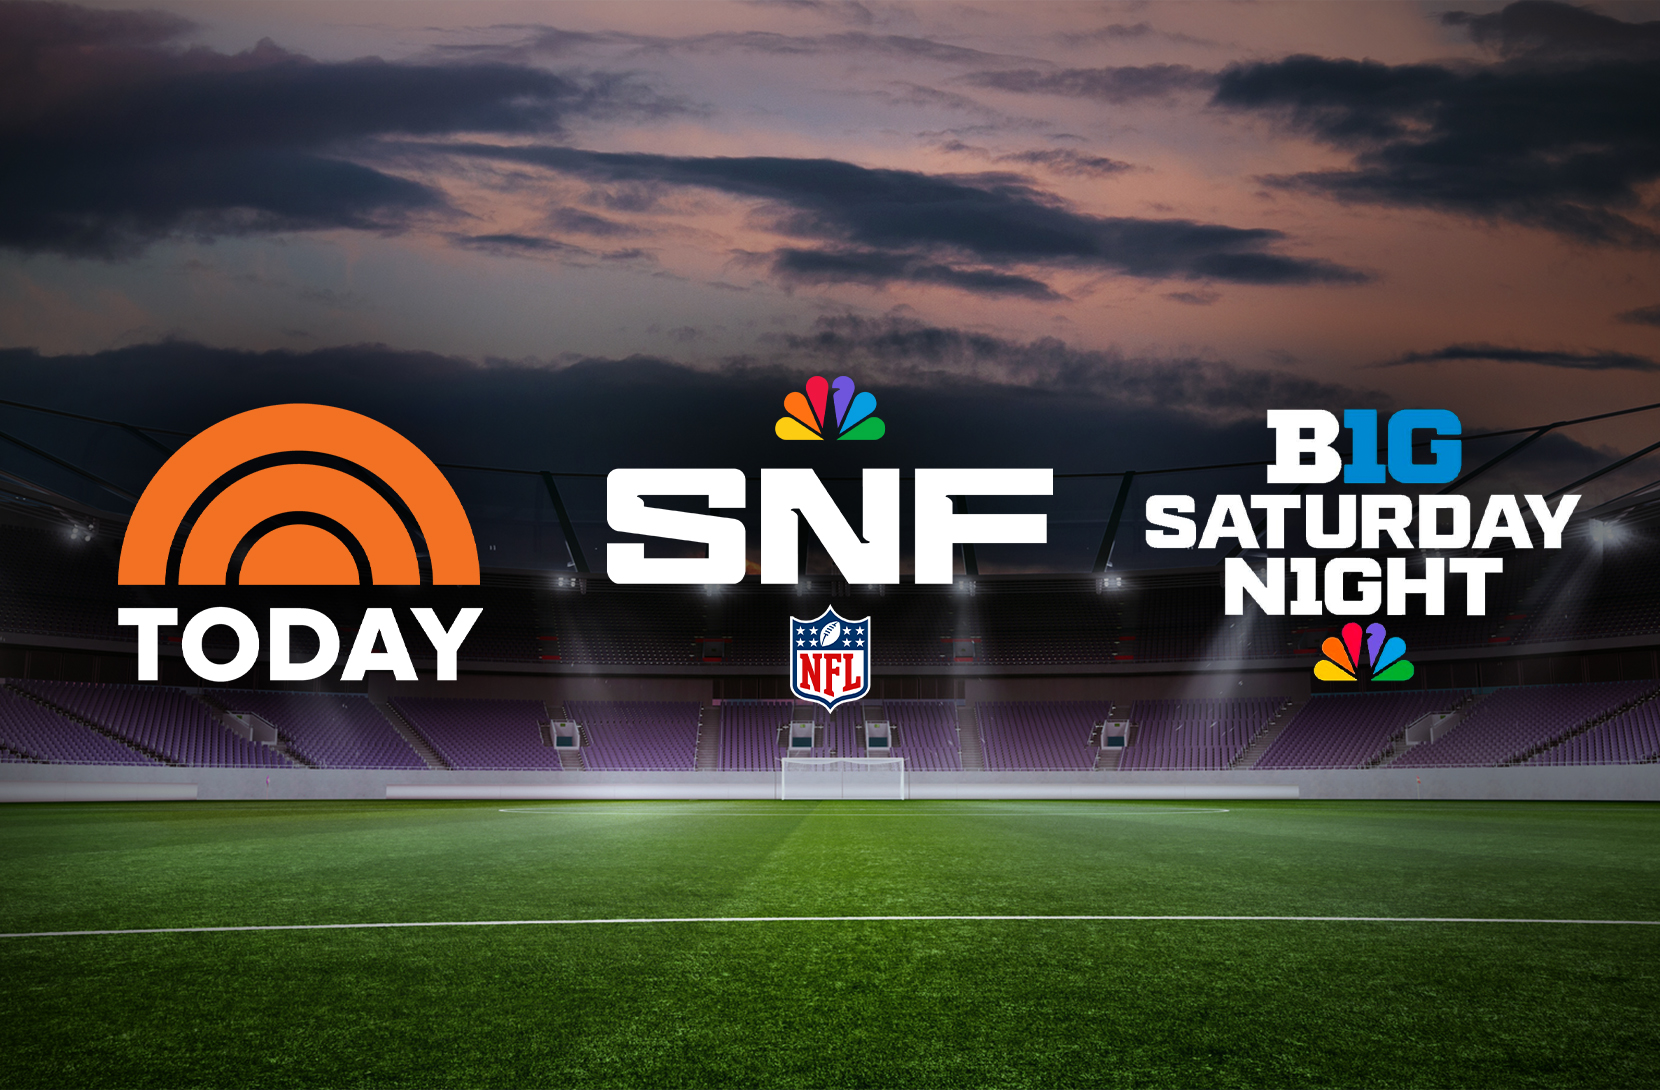 what channel are the nfl games on saturday